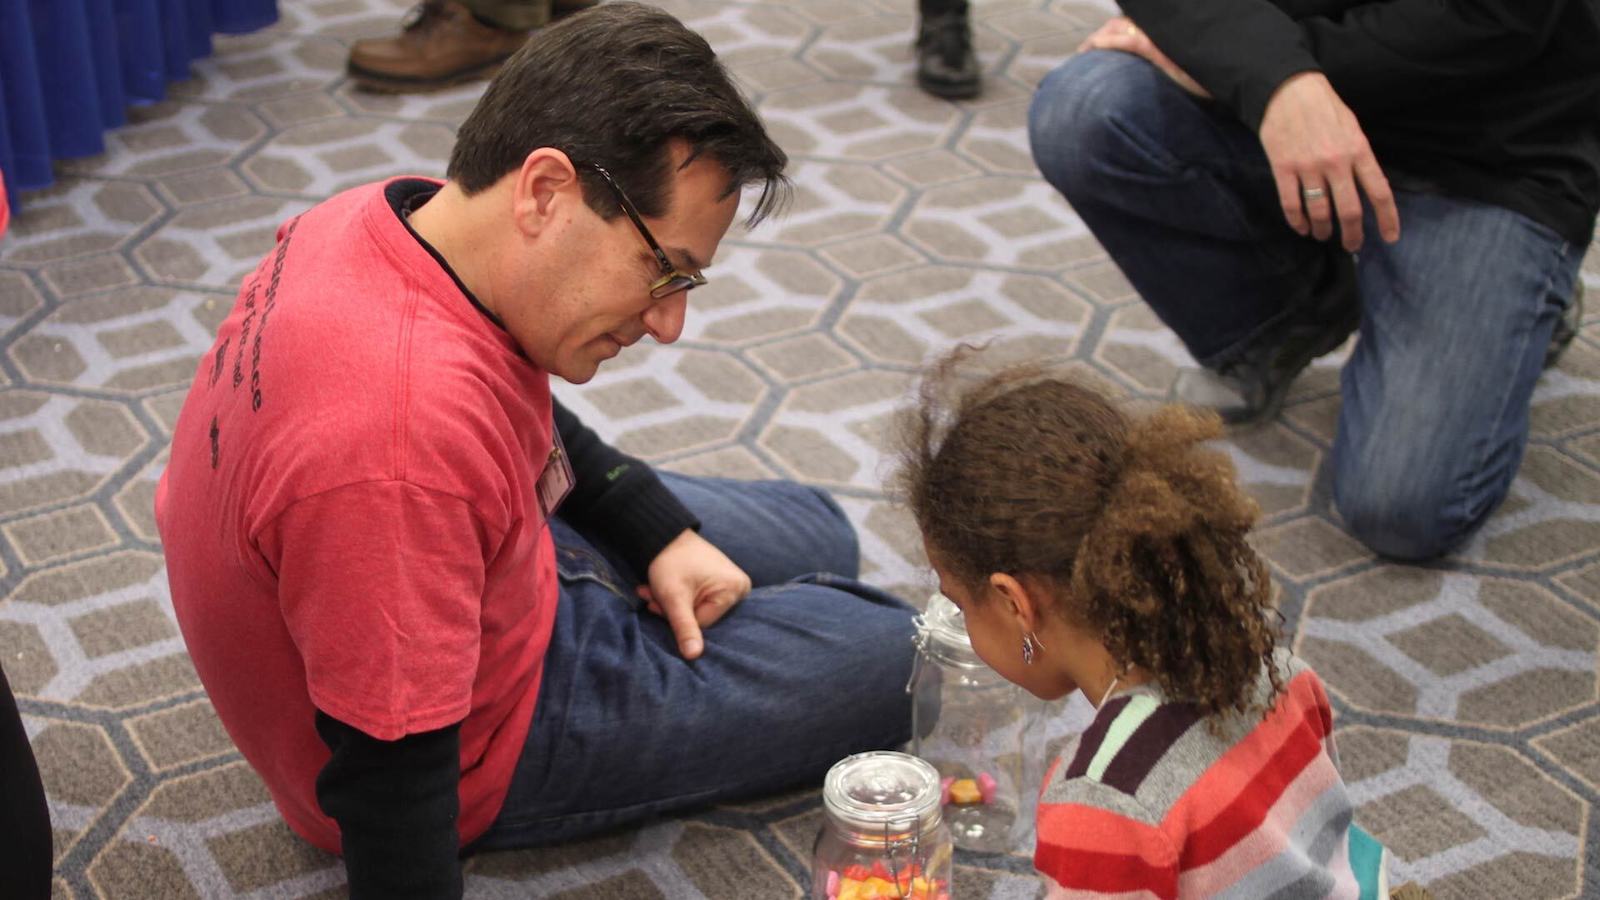  Linguistics Professor Jeff Lidz talks about adjectives with an aspiring child scientist at Family Science Days at the American Association for the Advancement of Science annual meeting in 2016.